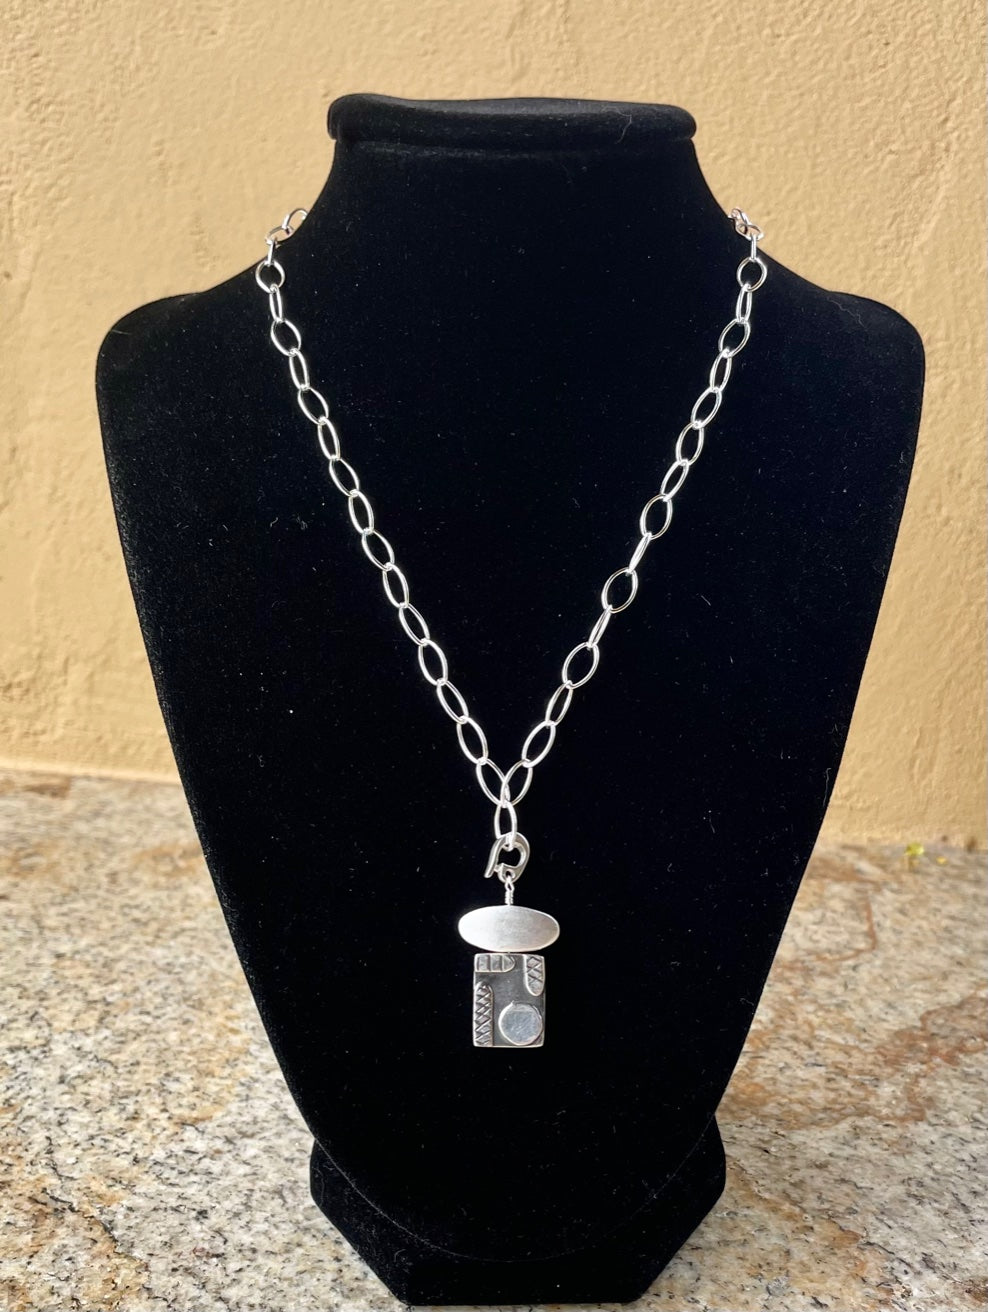 Necklace - Sterling silver chain with an Art Deco pendant